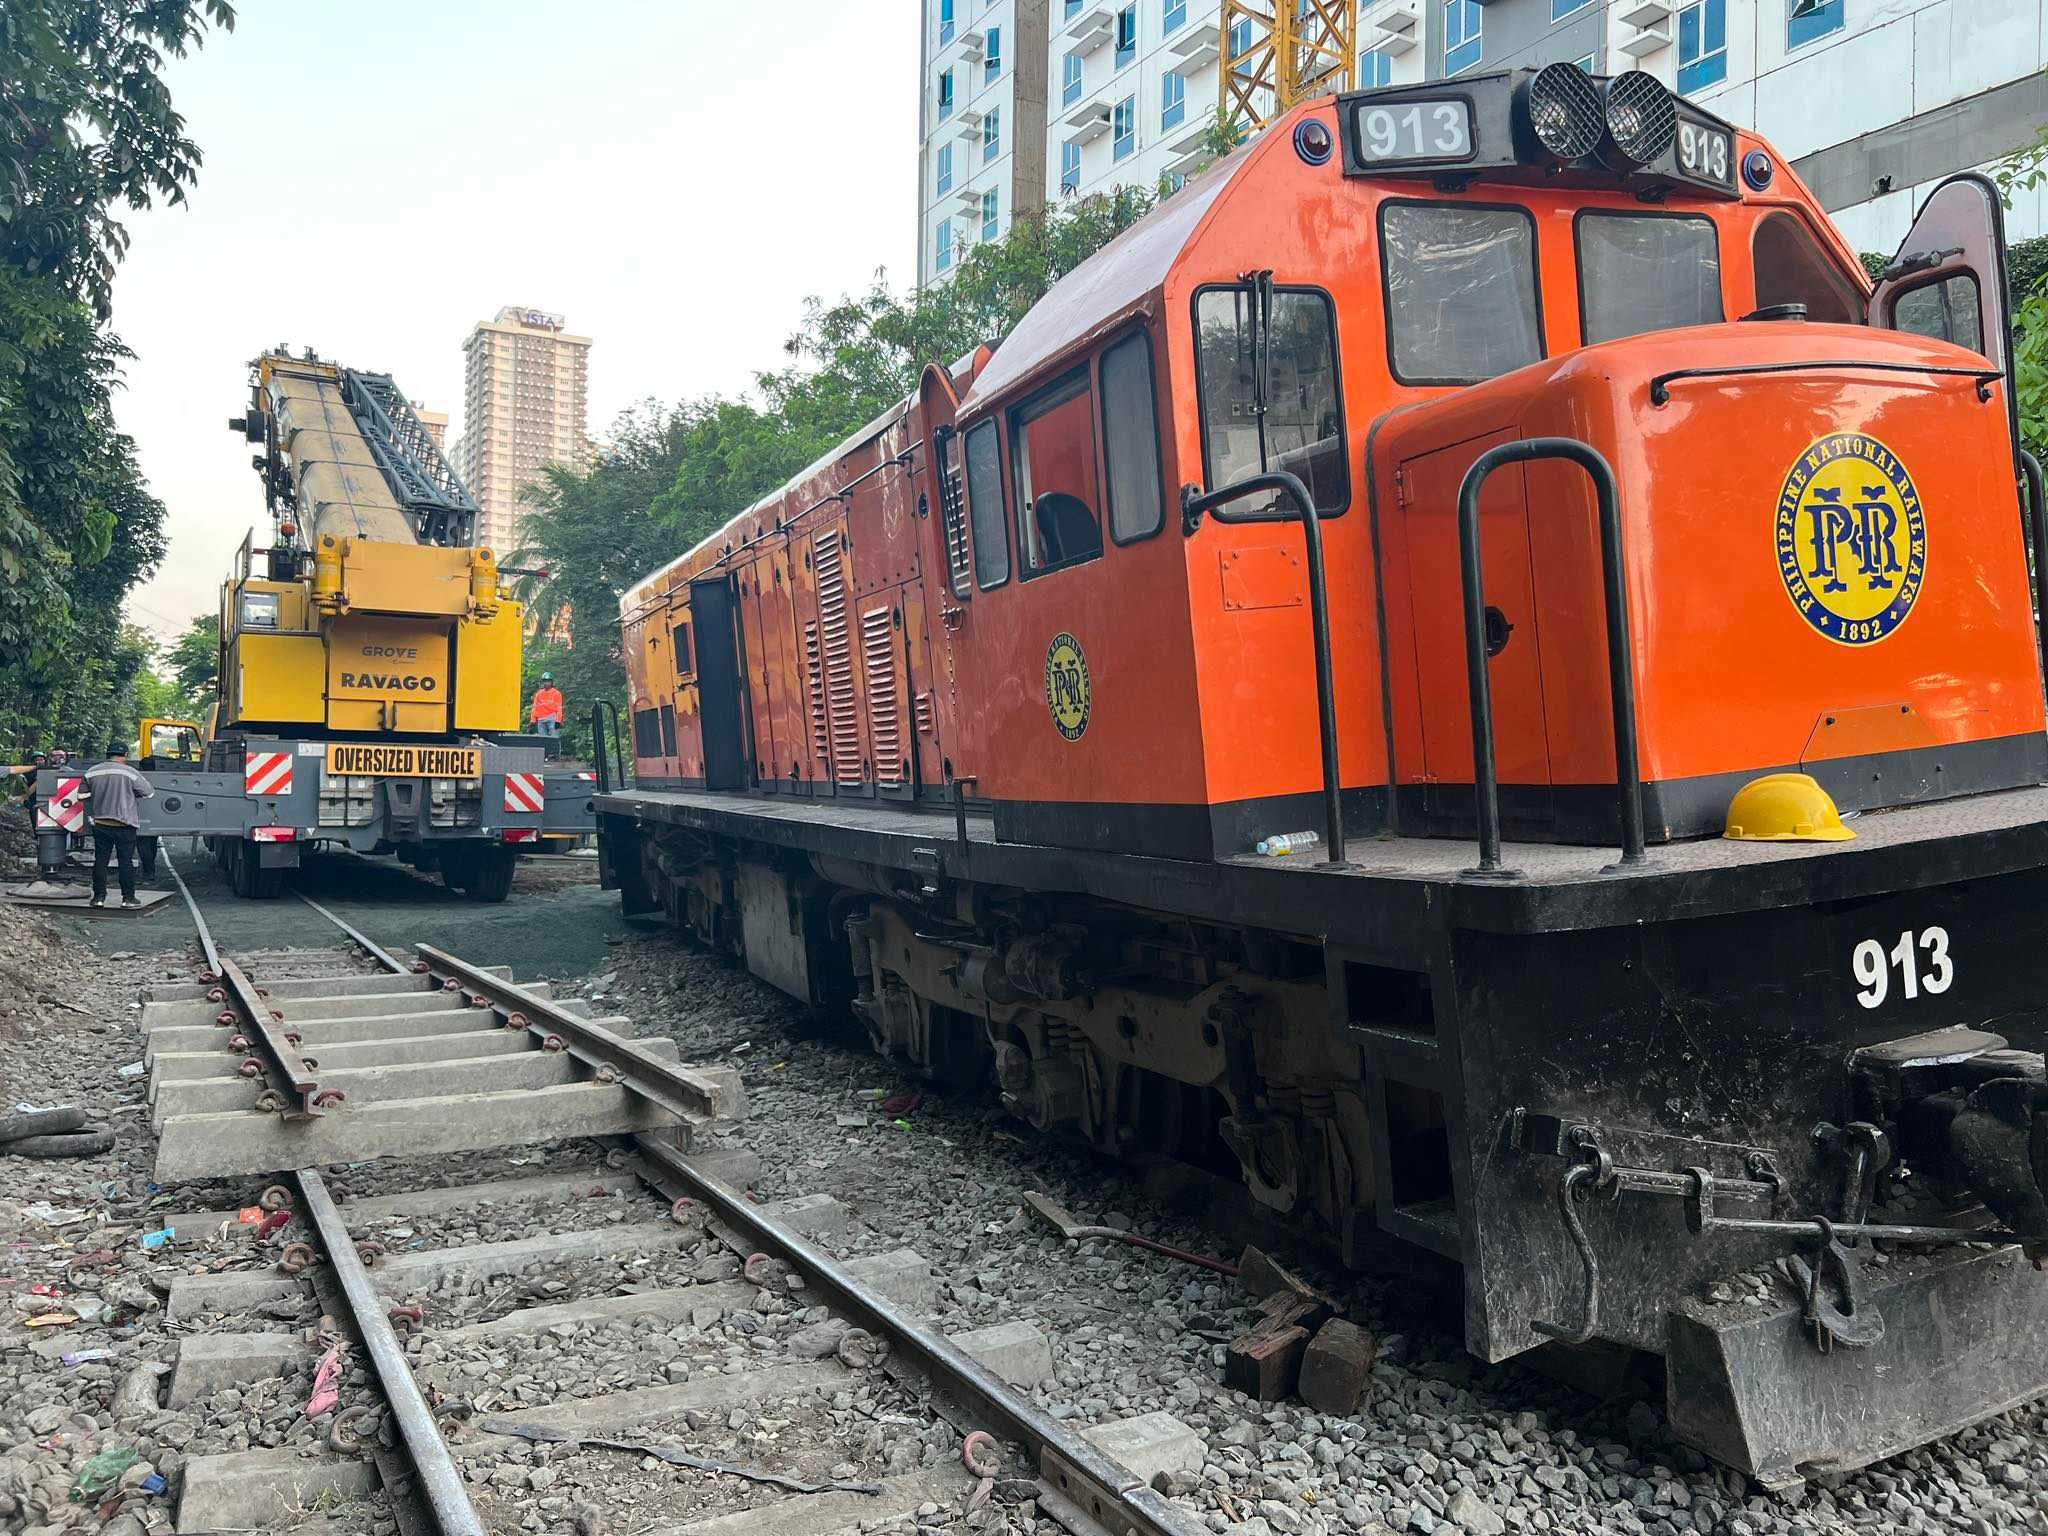 PNR operations still limited as rerailing continues